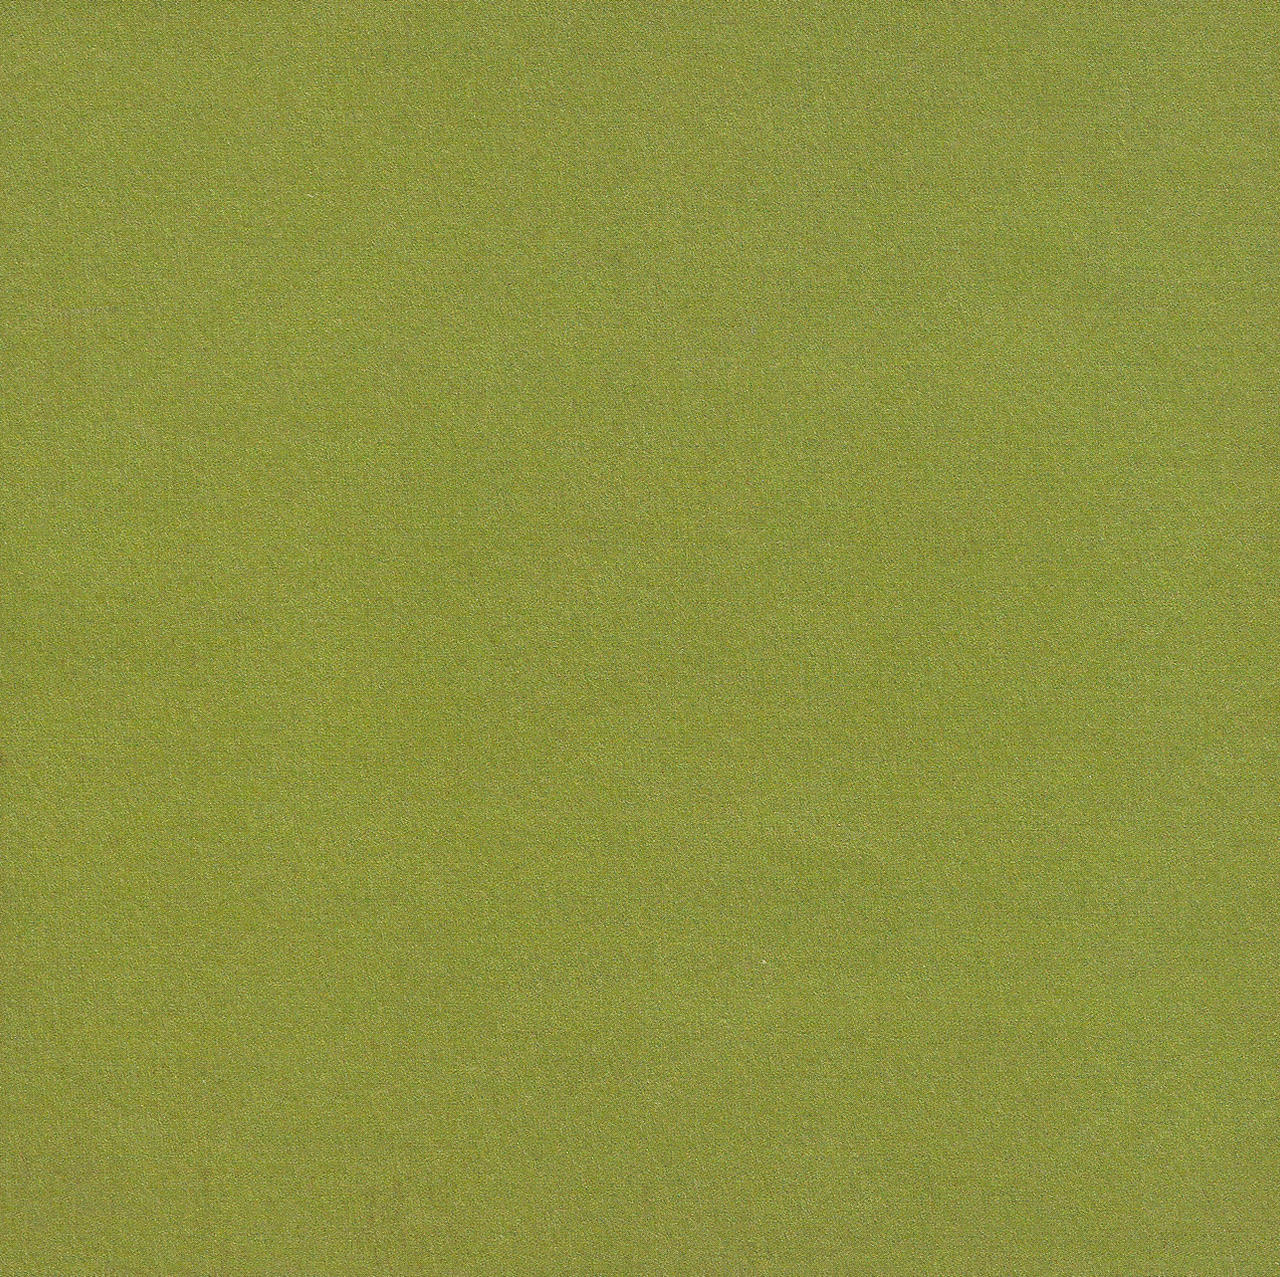 Olive Green Paper Background